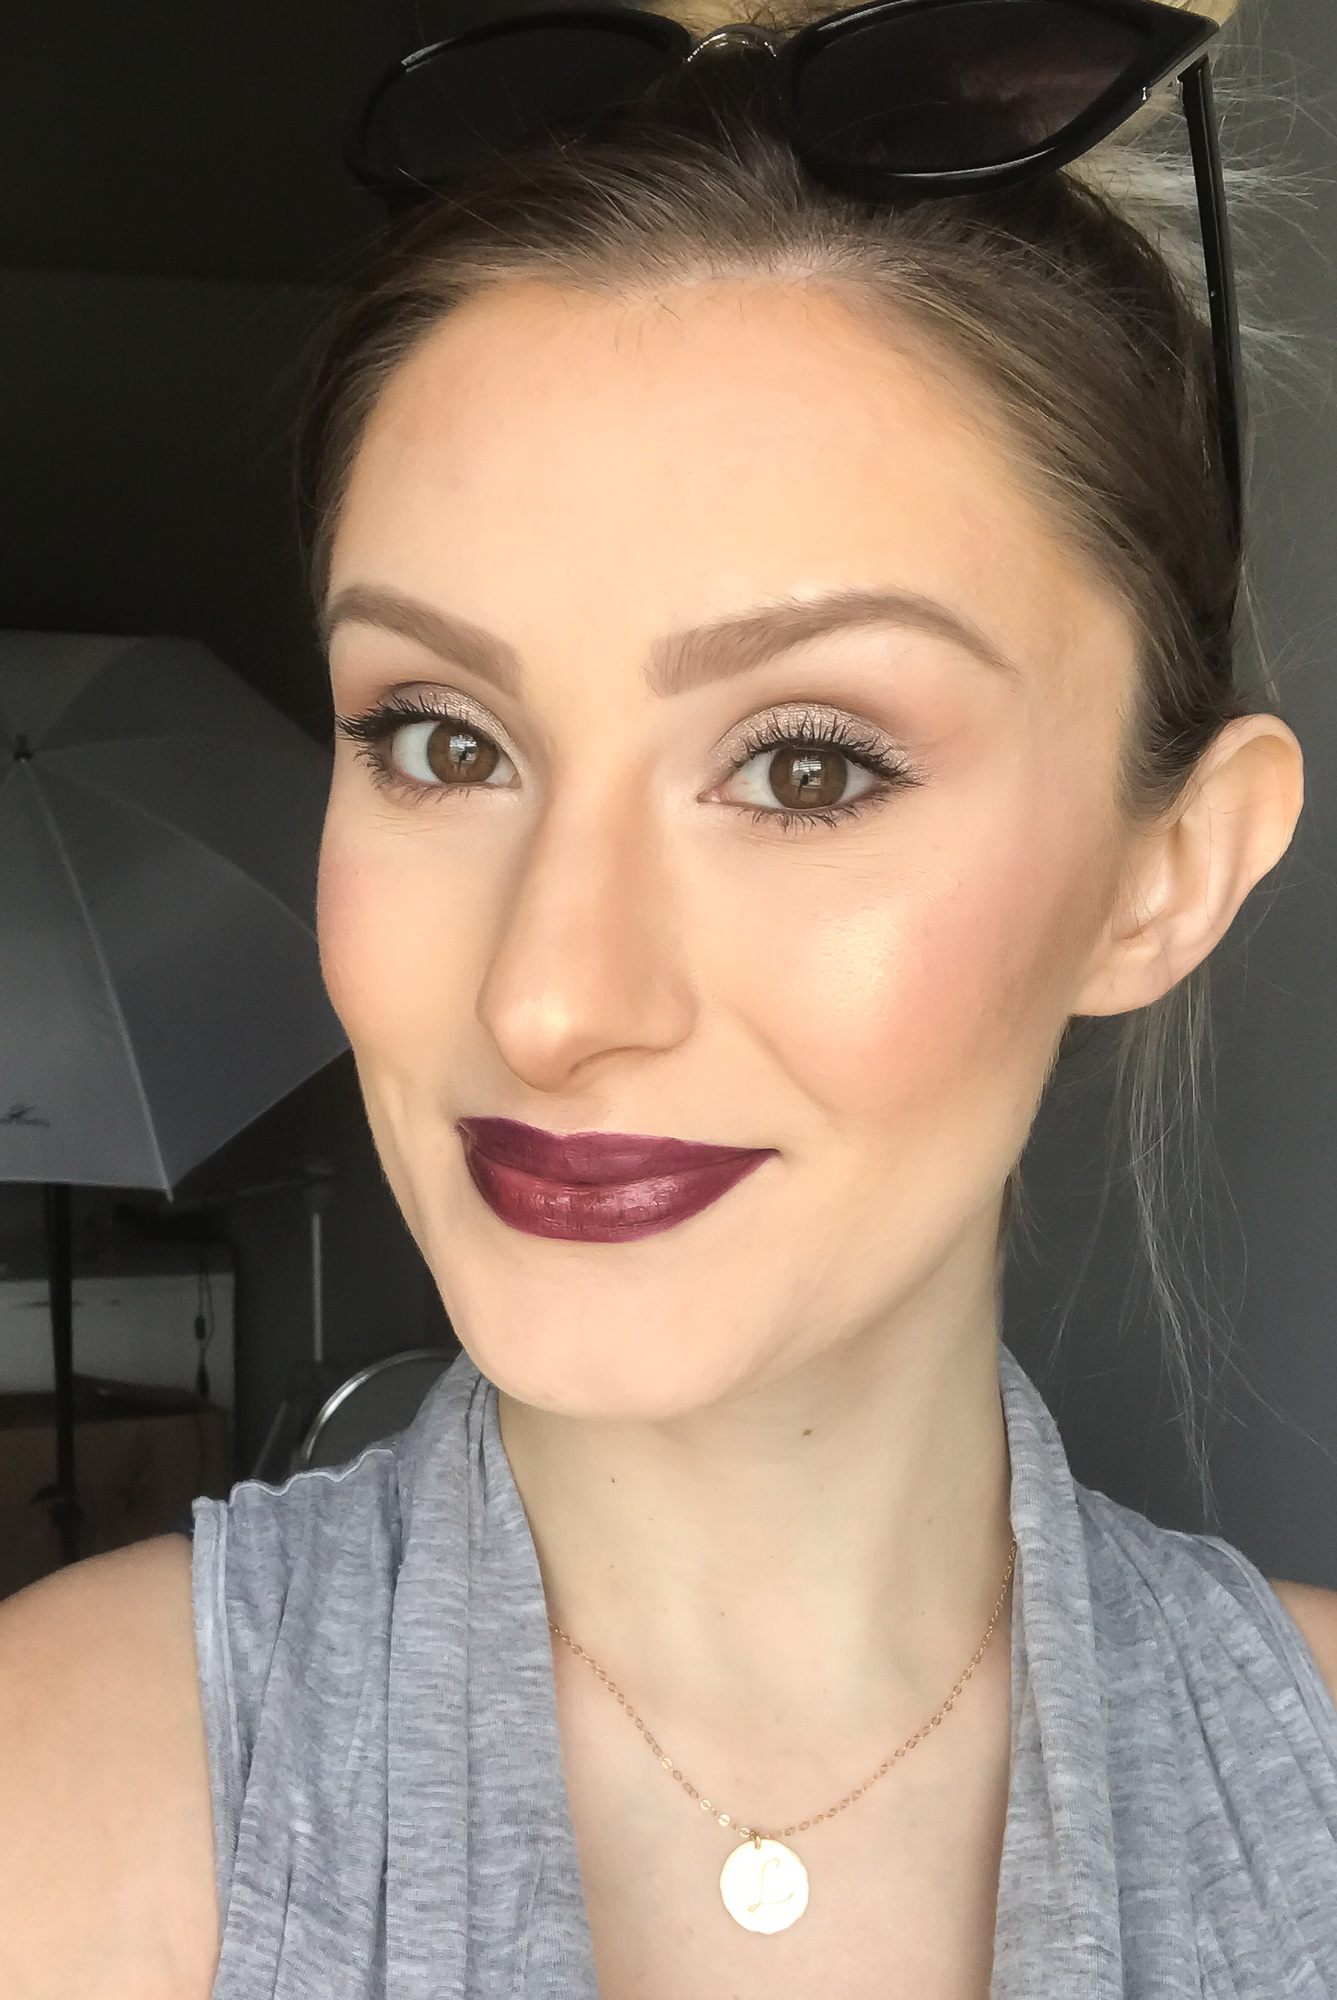 Lifestyle, fashion, and beauty blogger and vlogger Jessica Linn from Linn Style collaborating with SummerReign Cosmetics, a local Durham North Carolina lipstick company started by Ashley Summerville using all natural organic ingredients.